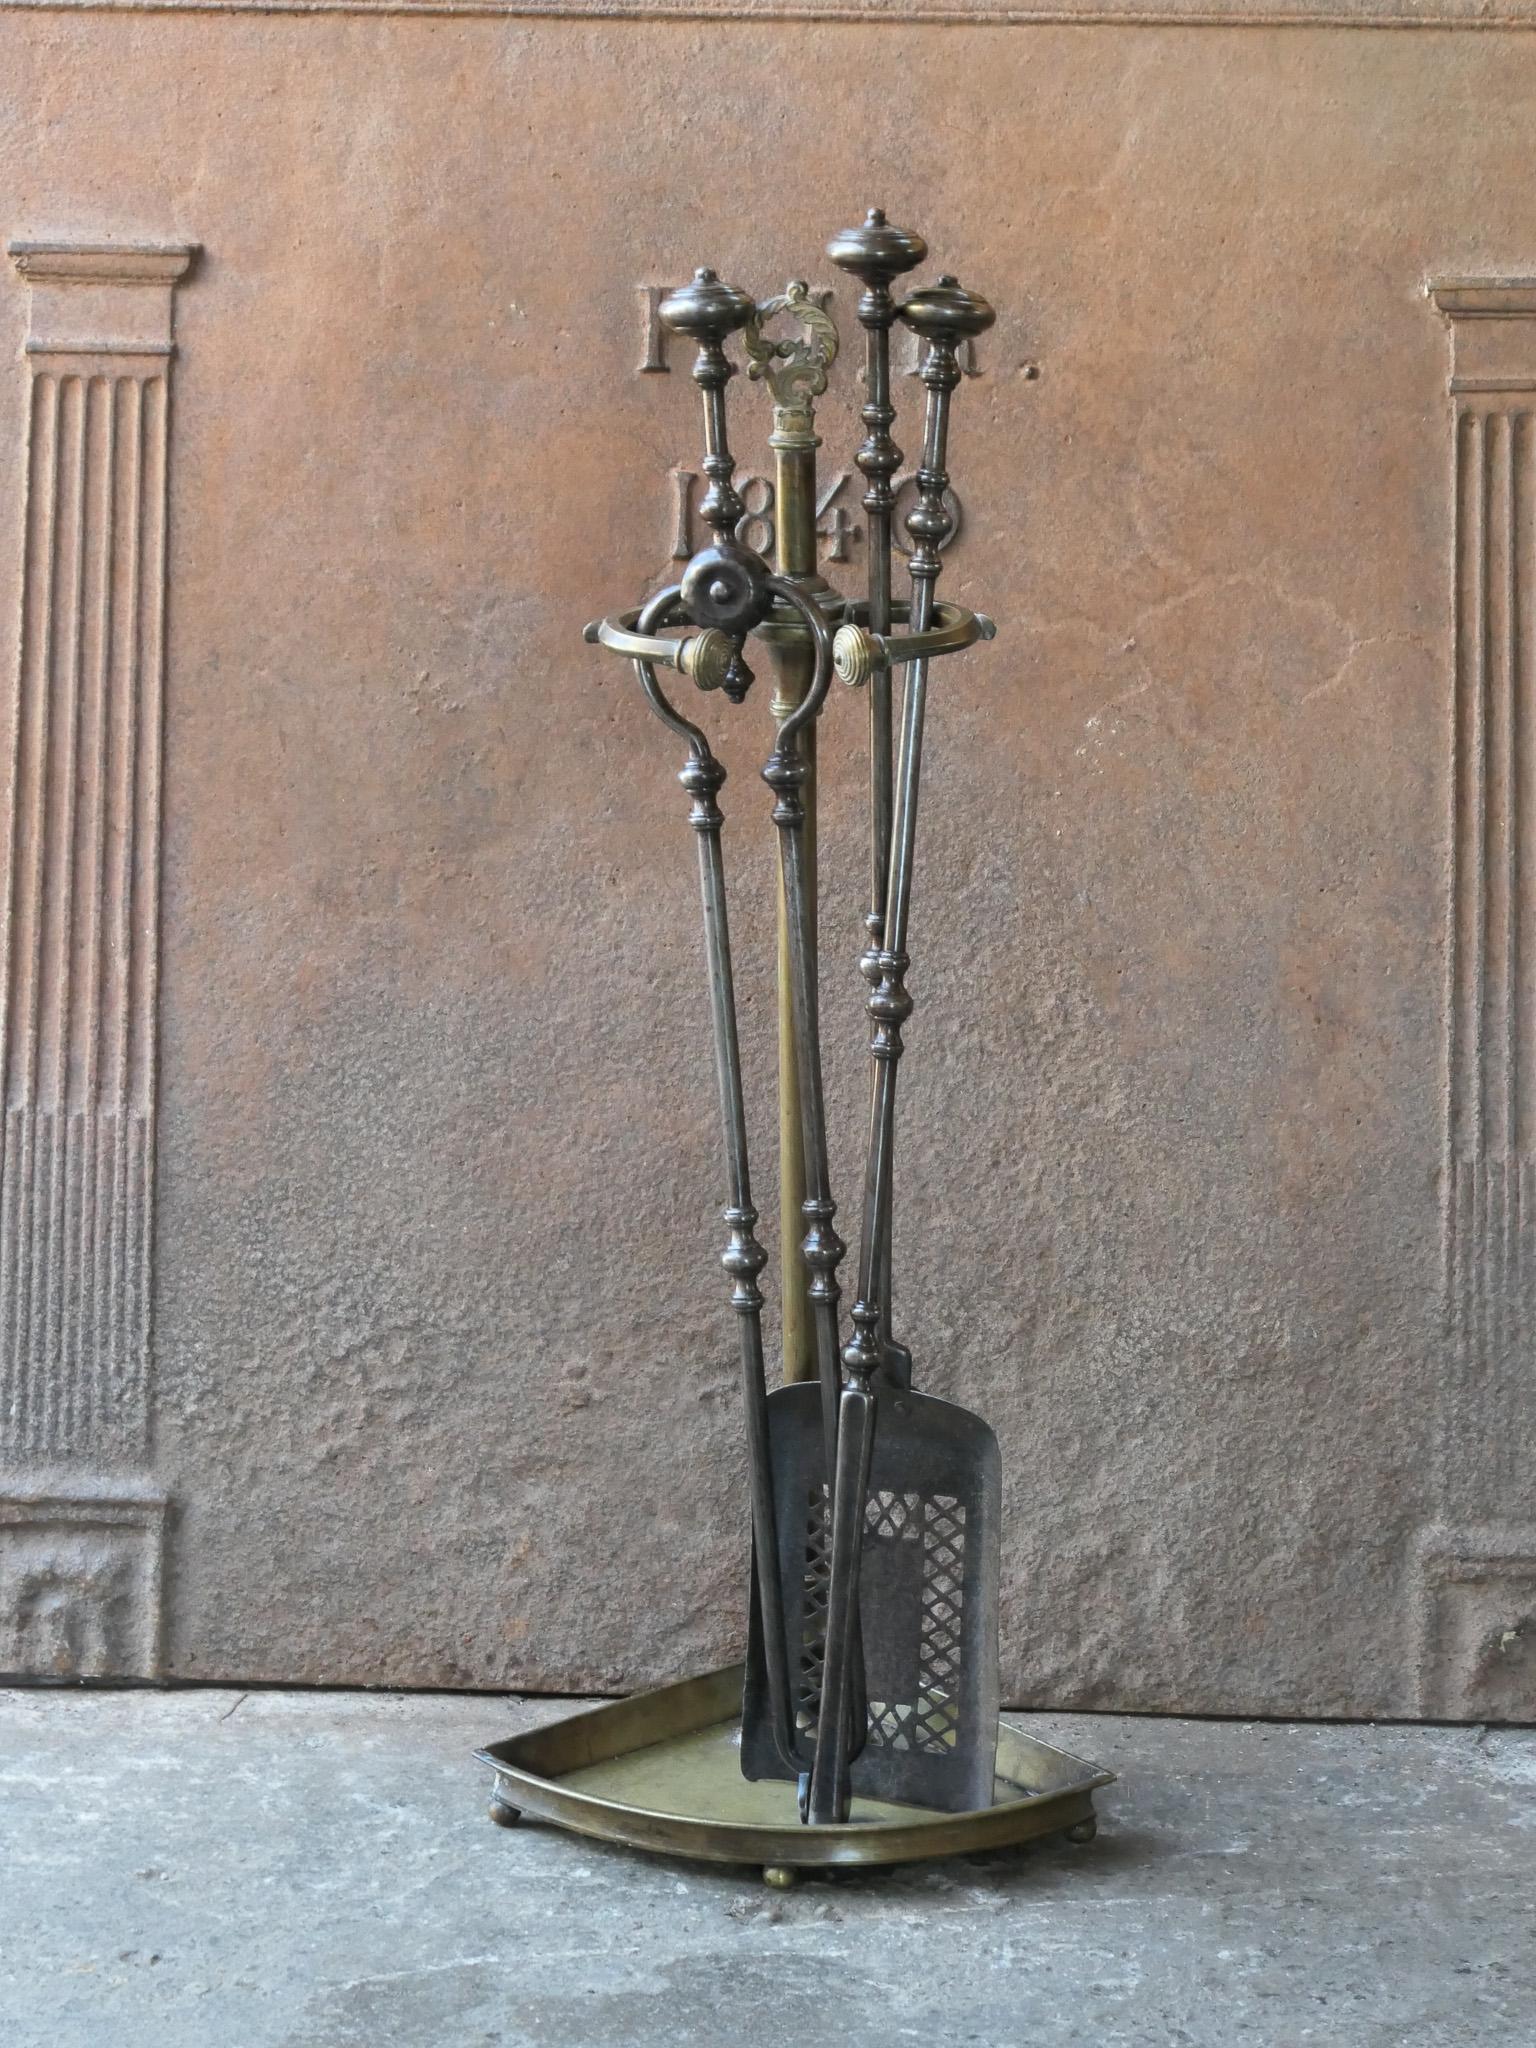 Beautiful 18th - 19th century English Georgian fireplace tool set. The tool set consists of tongs, shovel, poker and stand. The stand is made of brass and the tools are made of wrought iron. The set is in a good condition and fit for use in the